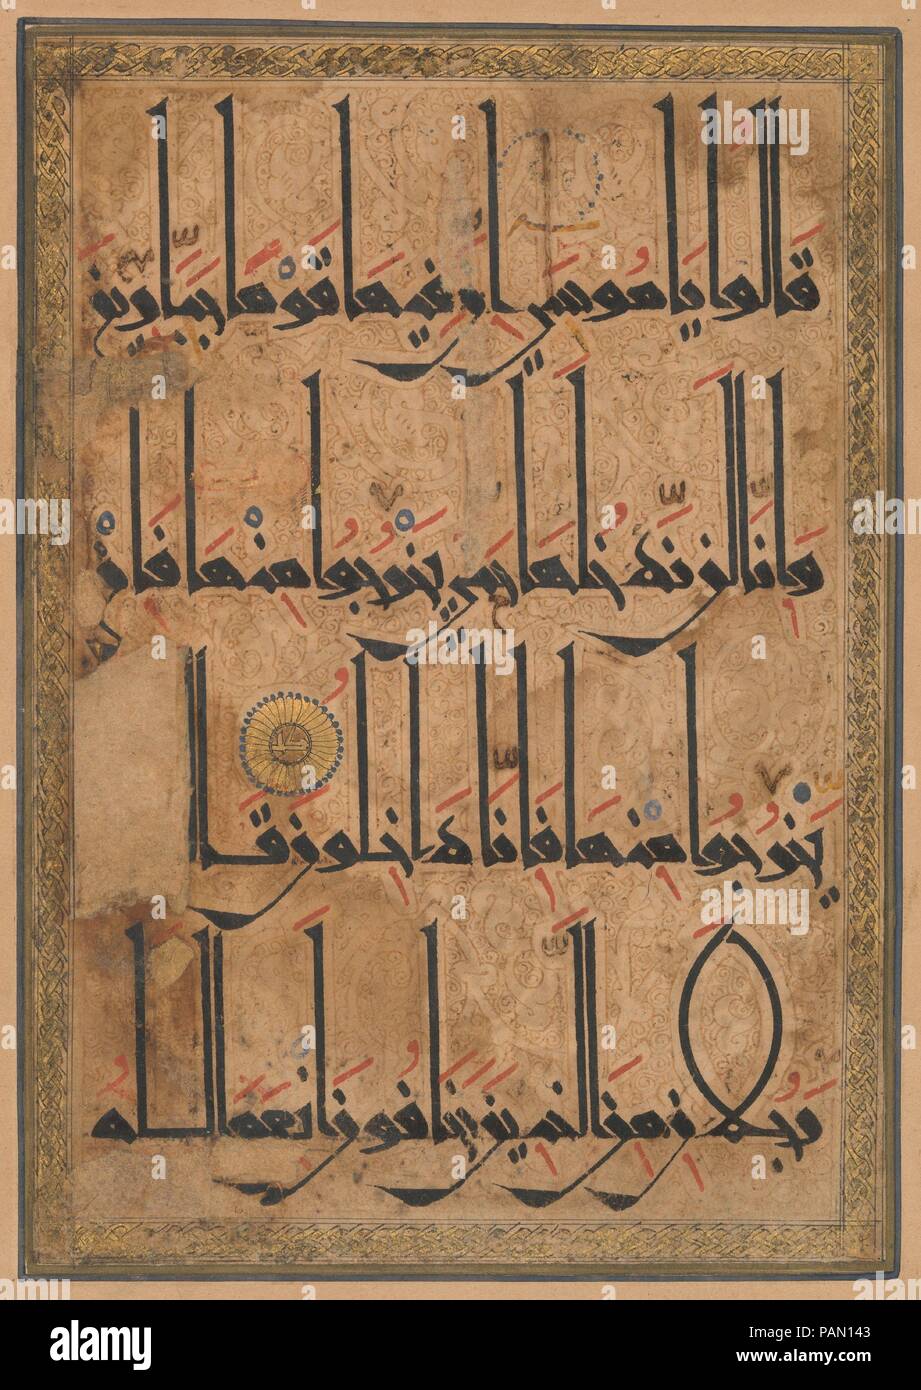 Folio from a Qur'an Manuscript. Dimensions: H. 11 3/4 in. (29.8 cm)   W. 8 3/4 in. (22.2 cm). Date: ca. 1180.  These folios from a dispersed Qur'an exemplify the transition during the Seljuq period from Qur'ans written in kufic script on parchment to those copied in the more rounded new-style writing on paper. By the late twelfth century, the practitioners of the new style had perfected its mannered, slightly eccentric forms. As seen here, these include the extreme elongation of tall letters and the ellipse formed by combining two of these letters, lam and alif. Museum: Metropolitan Museum of  Stock Photo